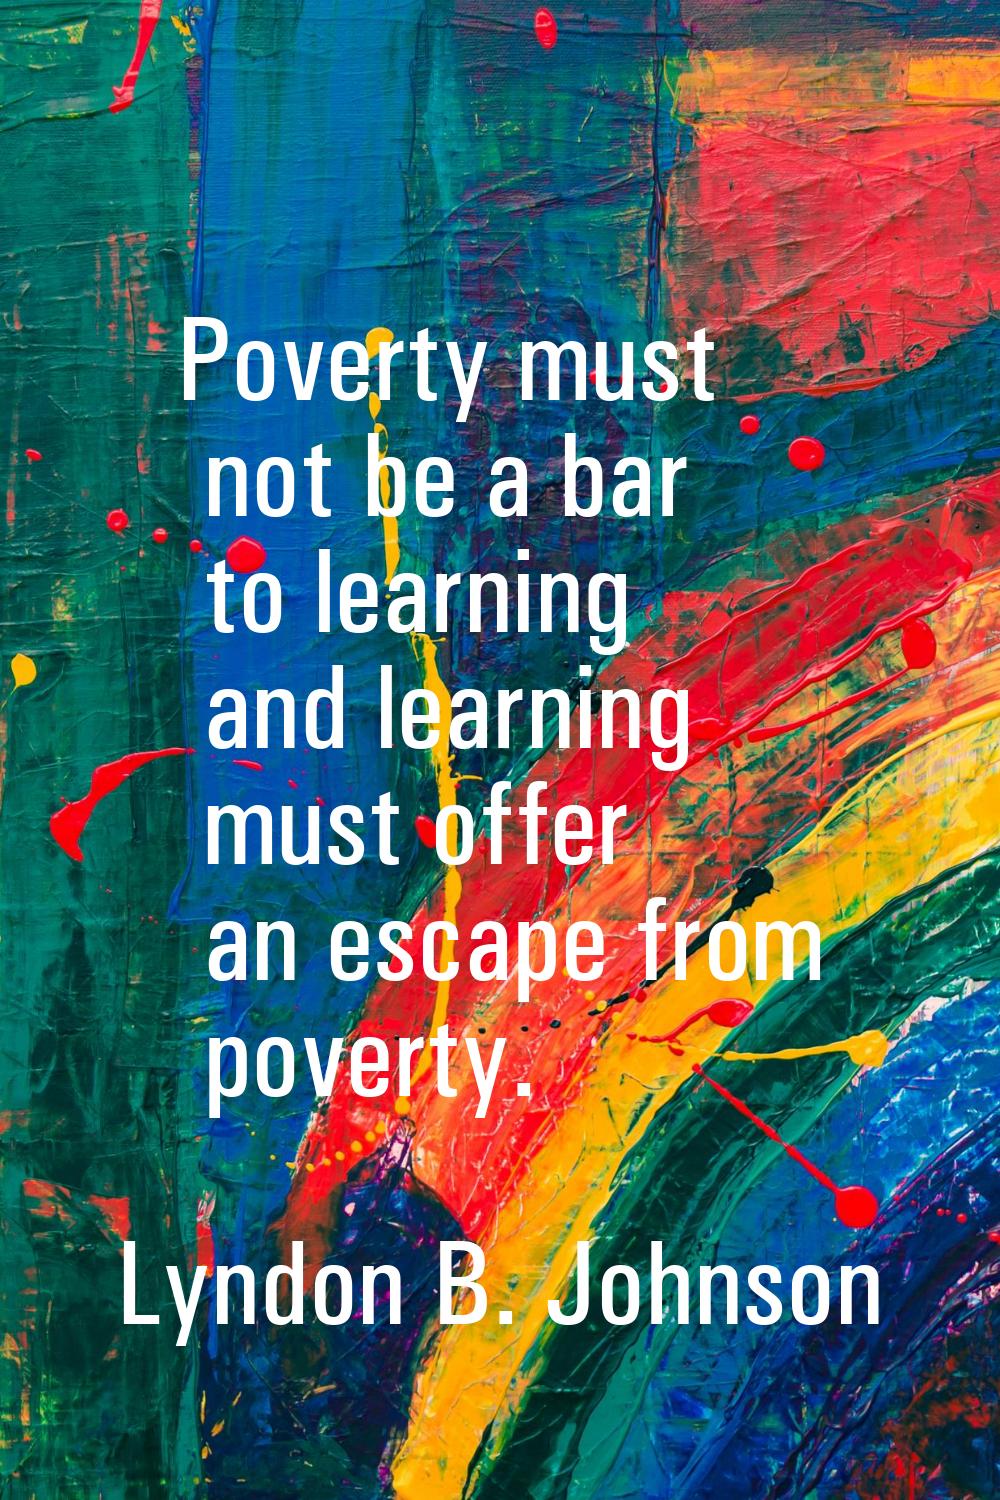 Poverty must not be a bar to learning and learning must offer an escape from poverty.